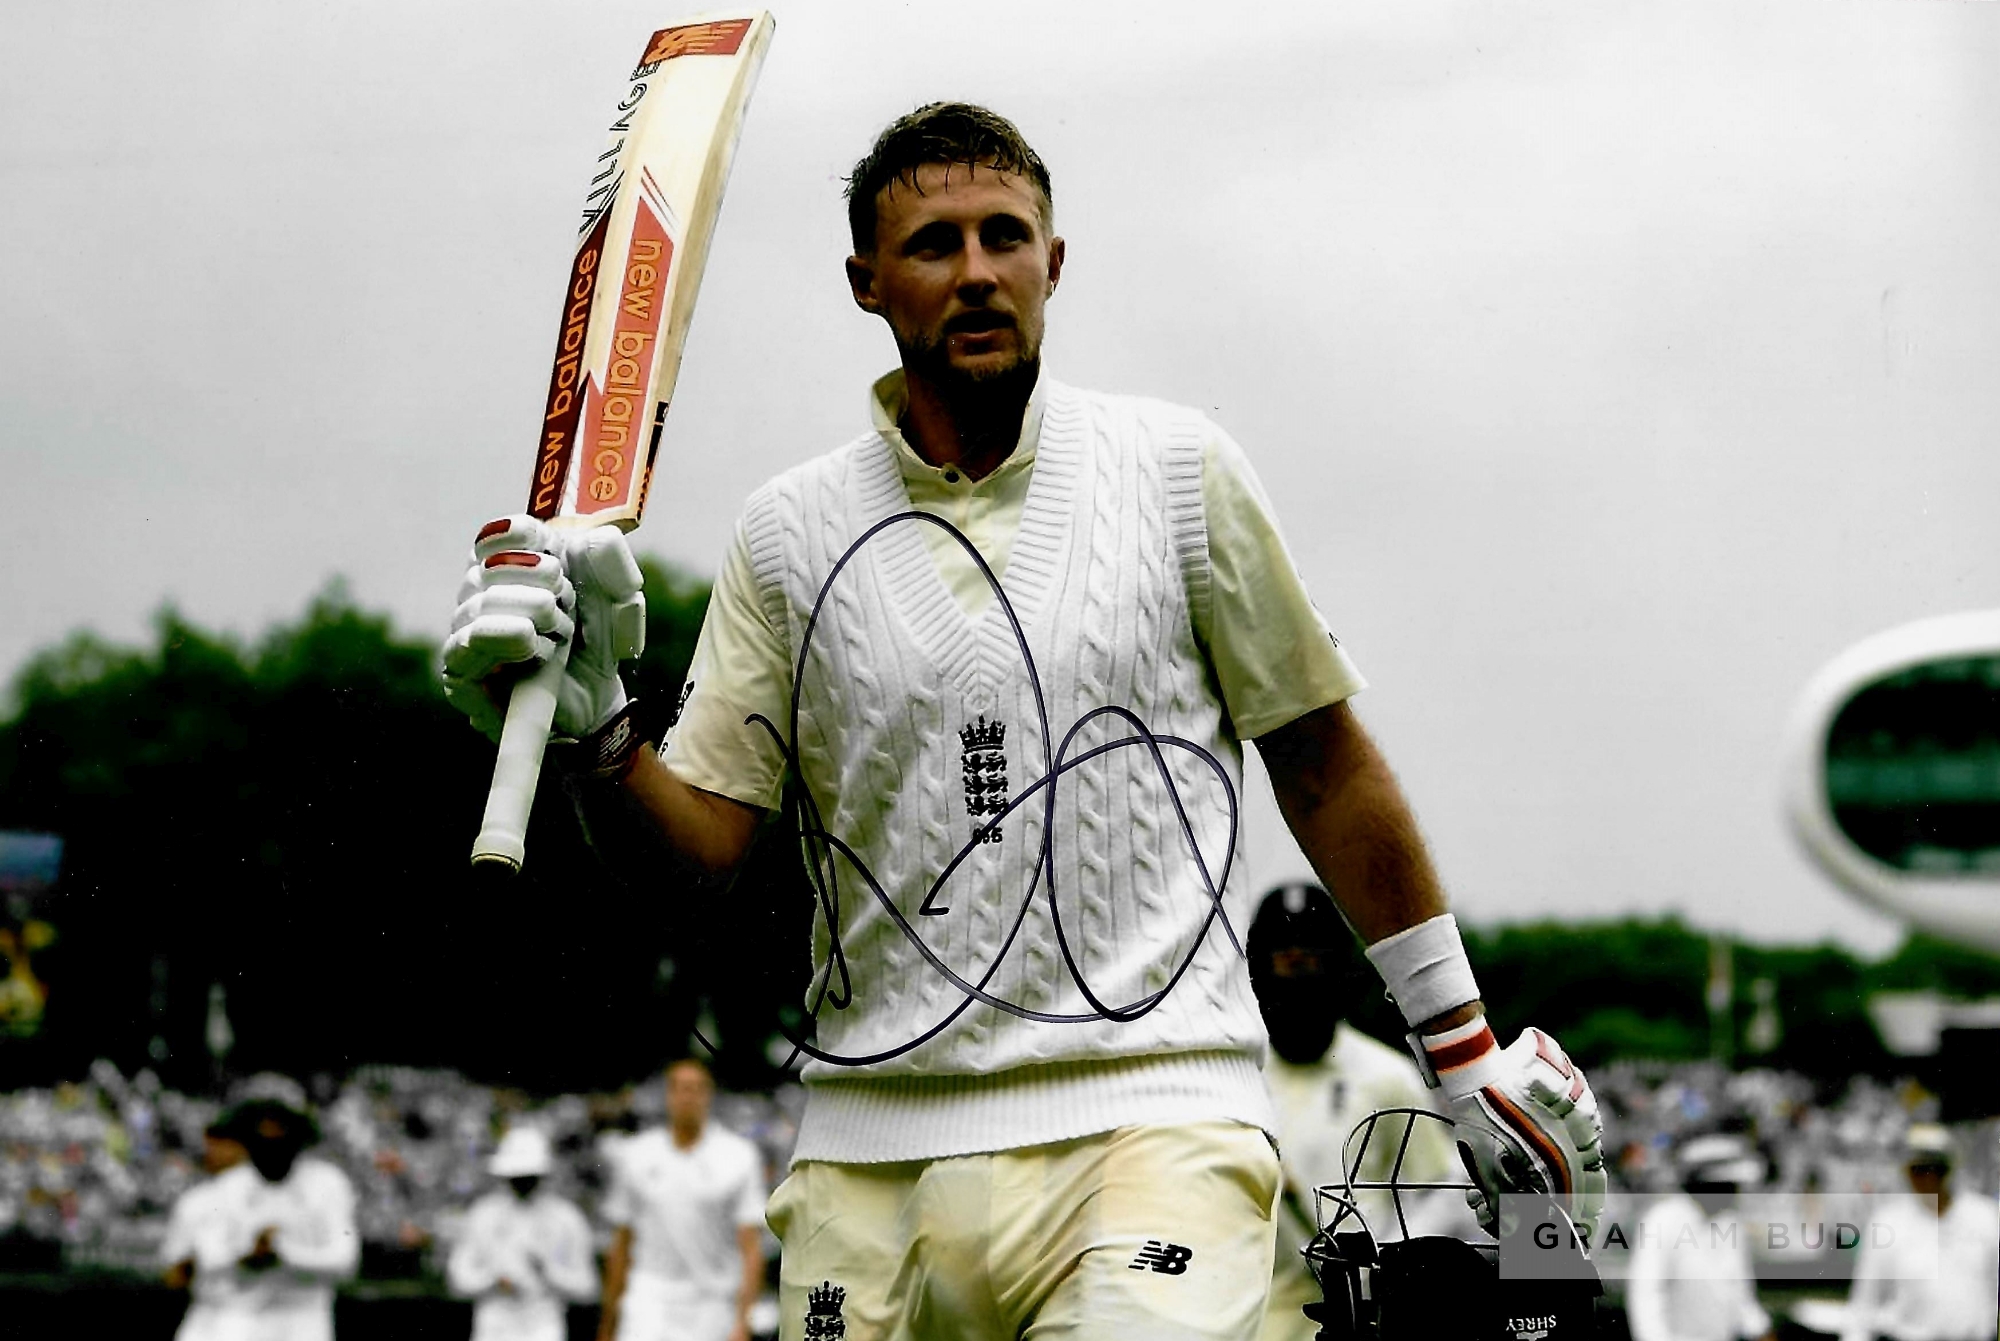 Joe Root (England) signed New Balance mini-bat and action photograph, colour photo 8 by 12in.,